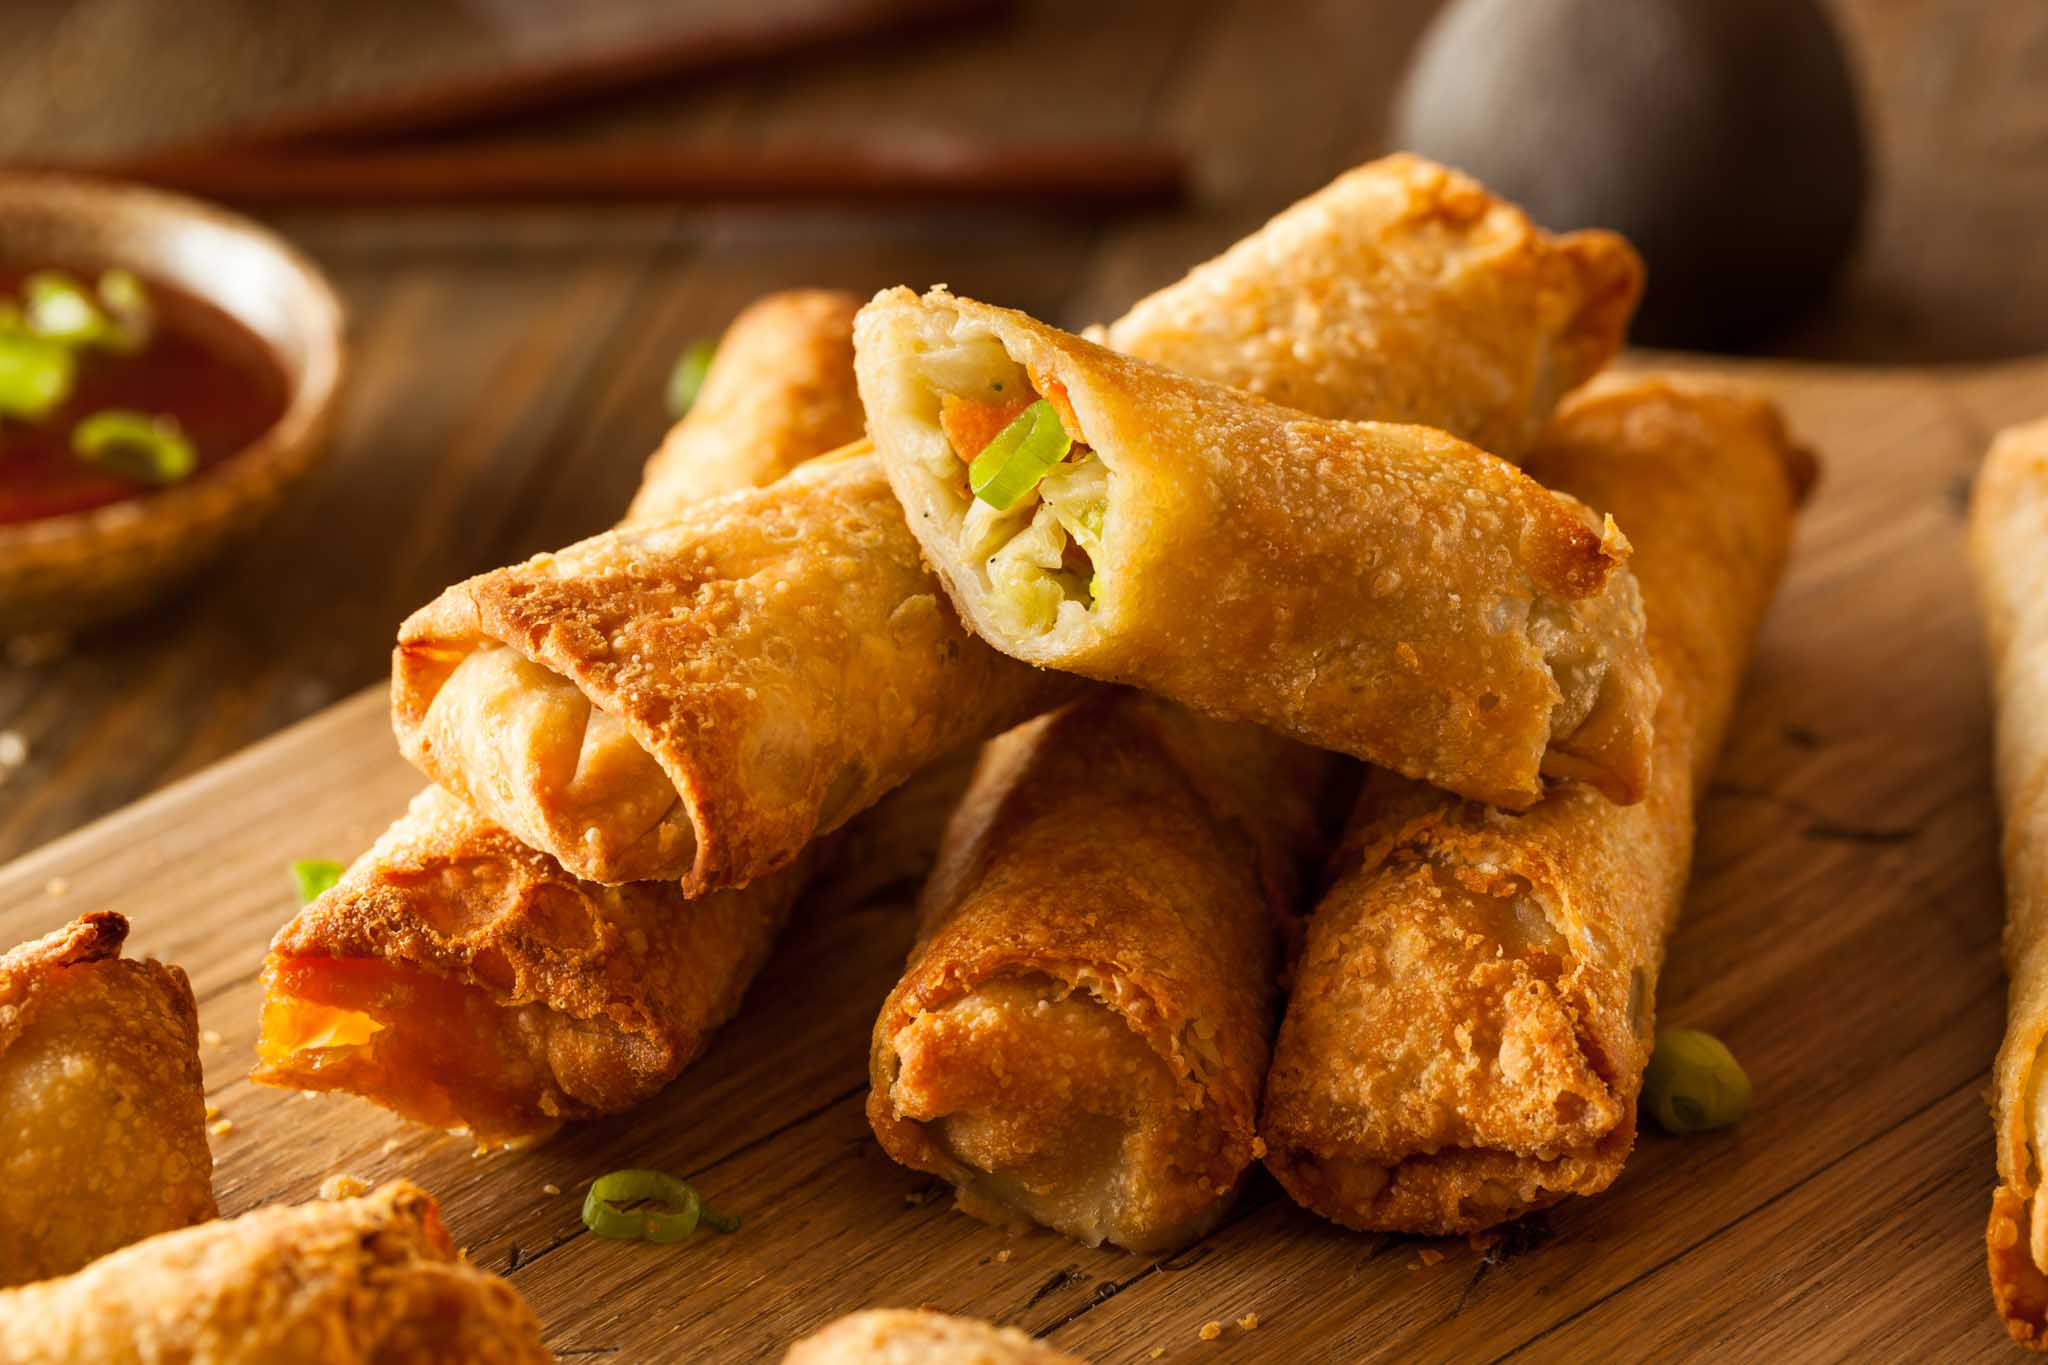 The Real Food Academy Miami fresh made eggrolls.